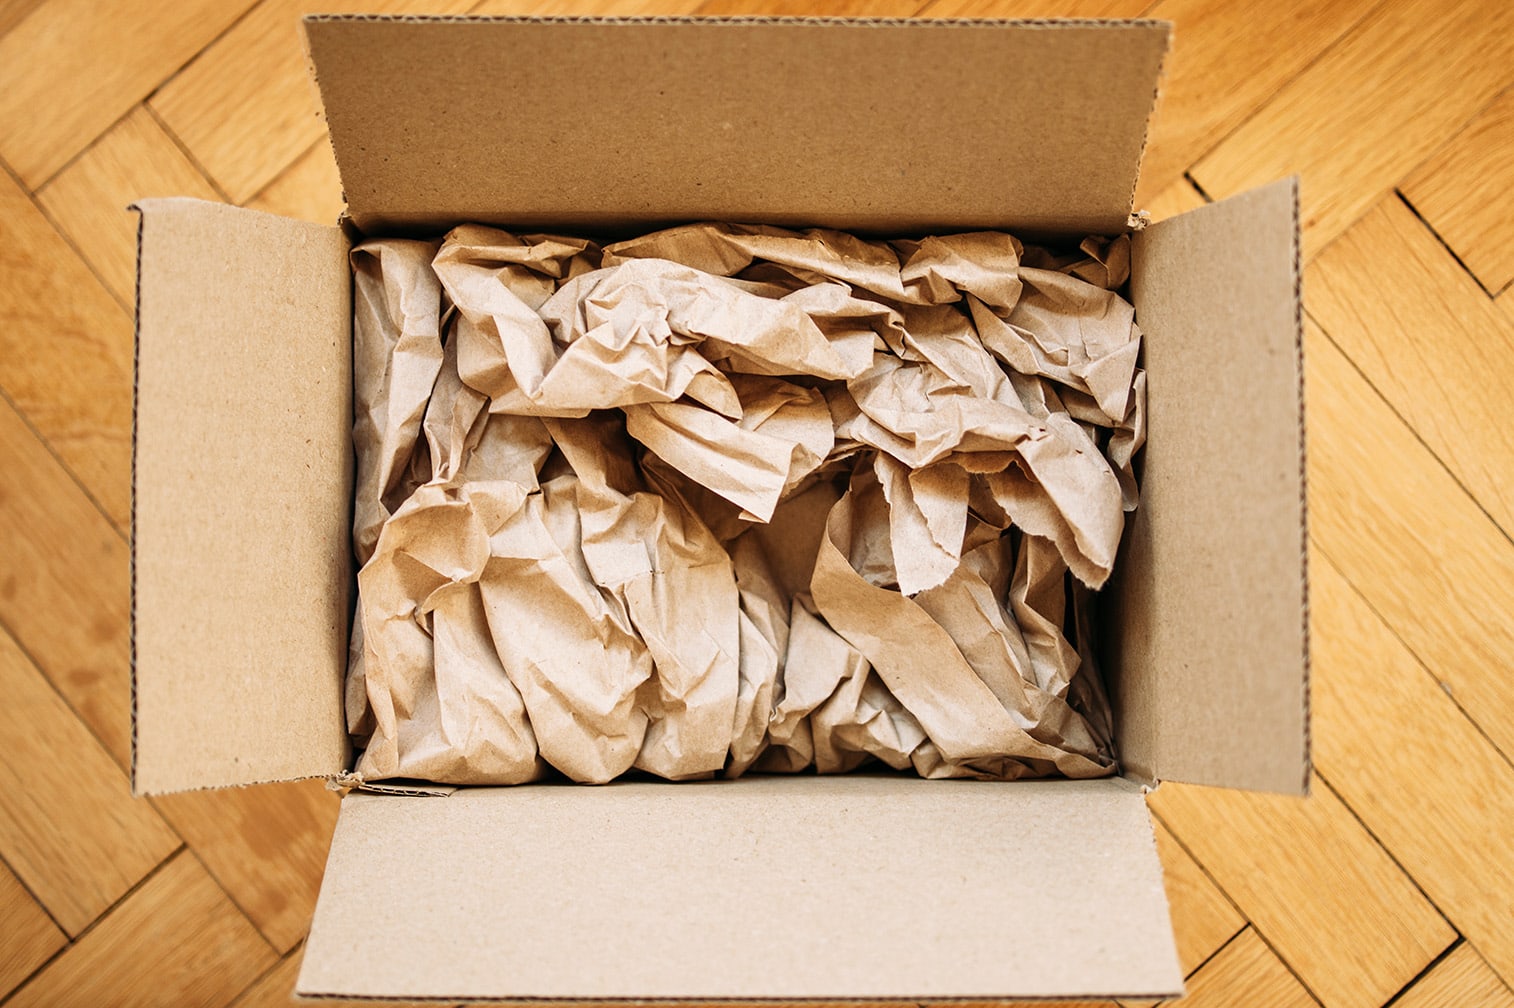 Why We Prefer Packing Paper Over Packing Peanuts - Packaging